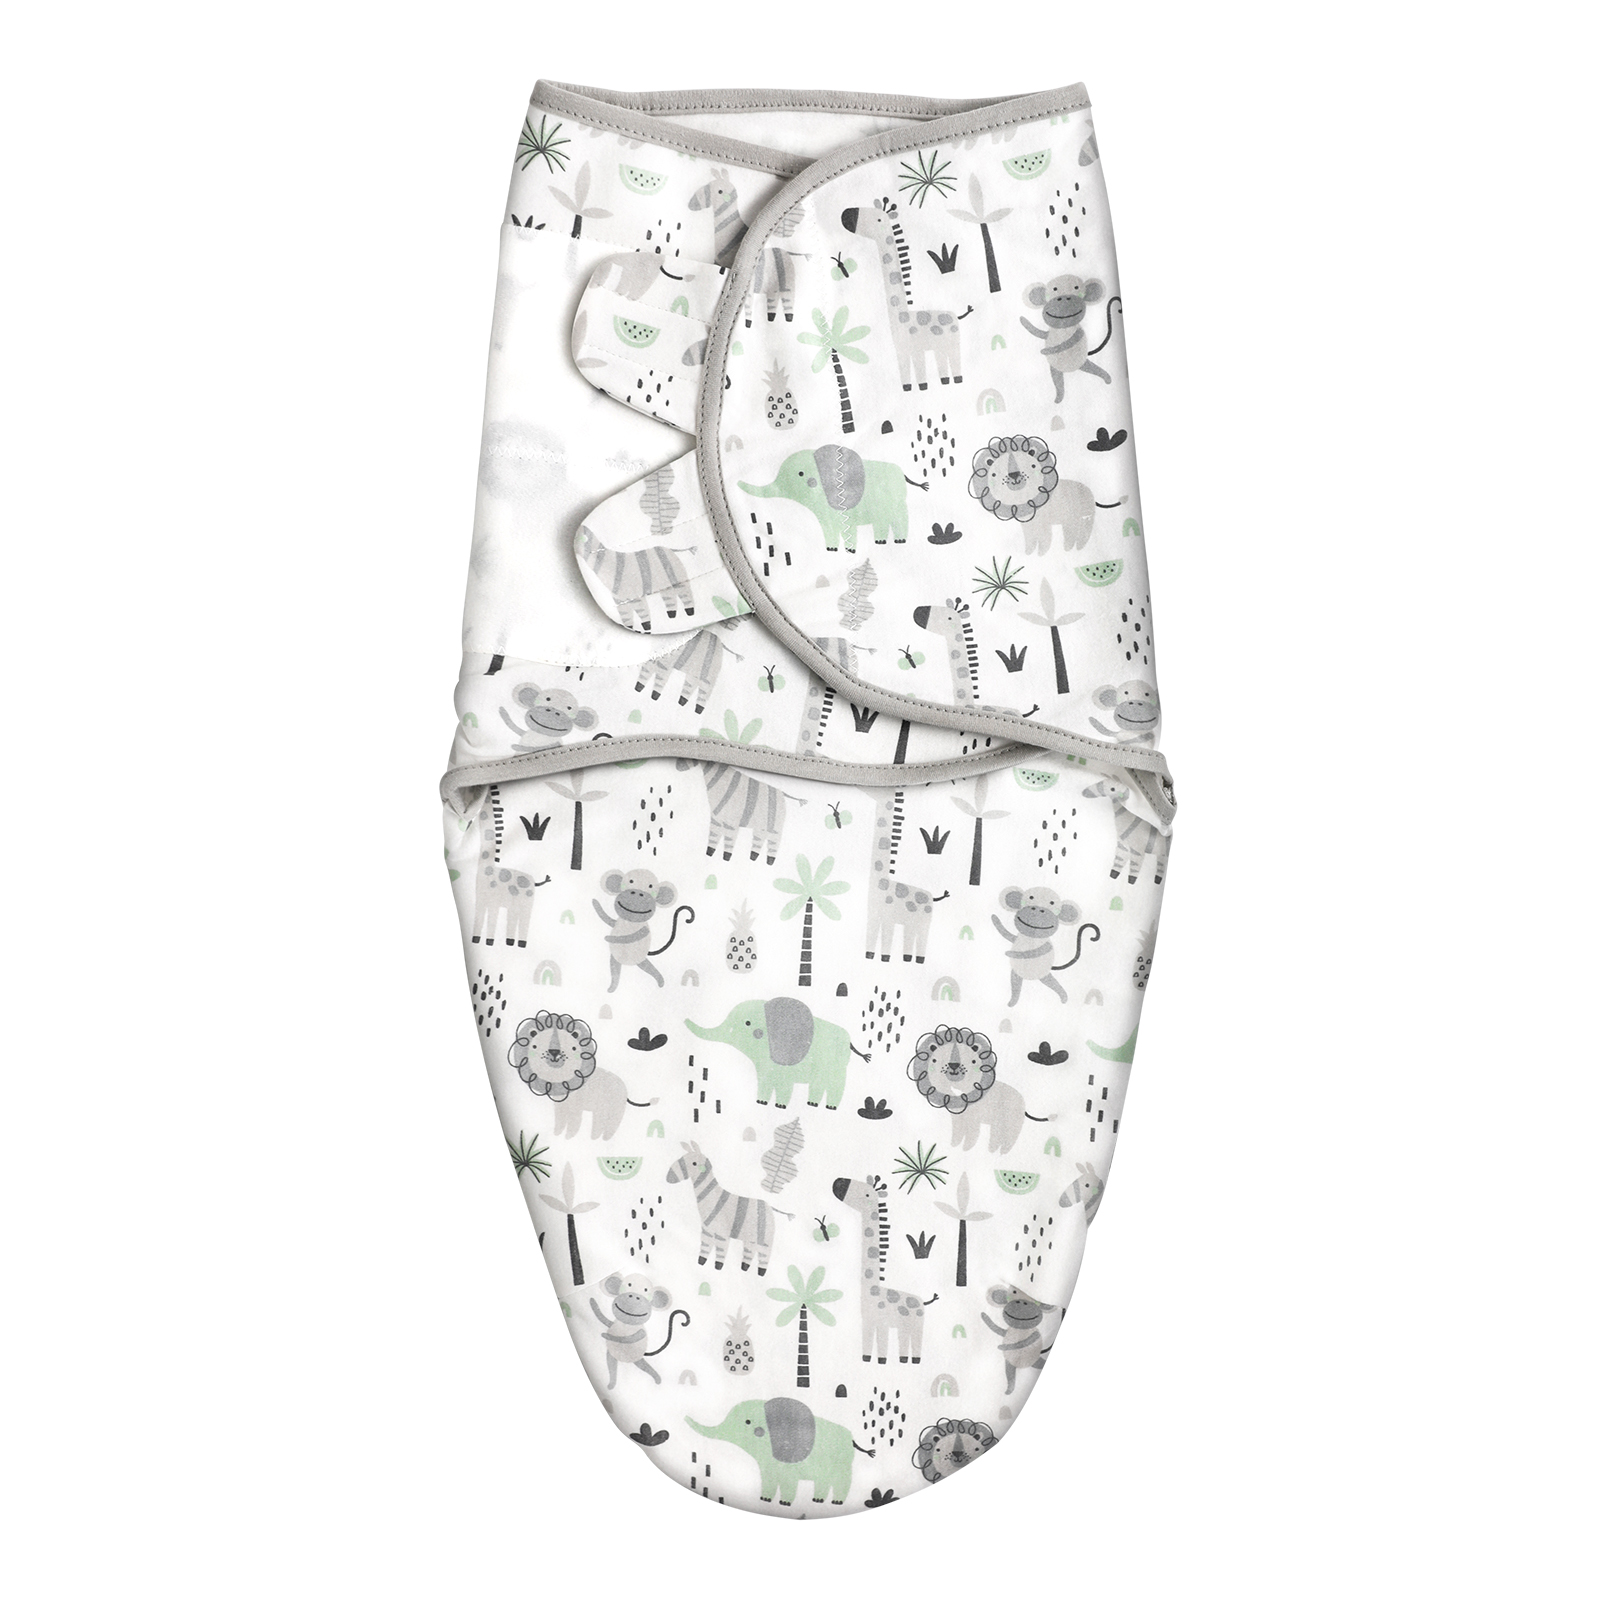 Bushland | Gllquen Baby Swaddle 0-3 Months 1-Pack